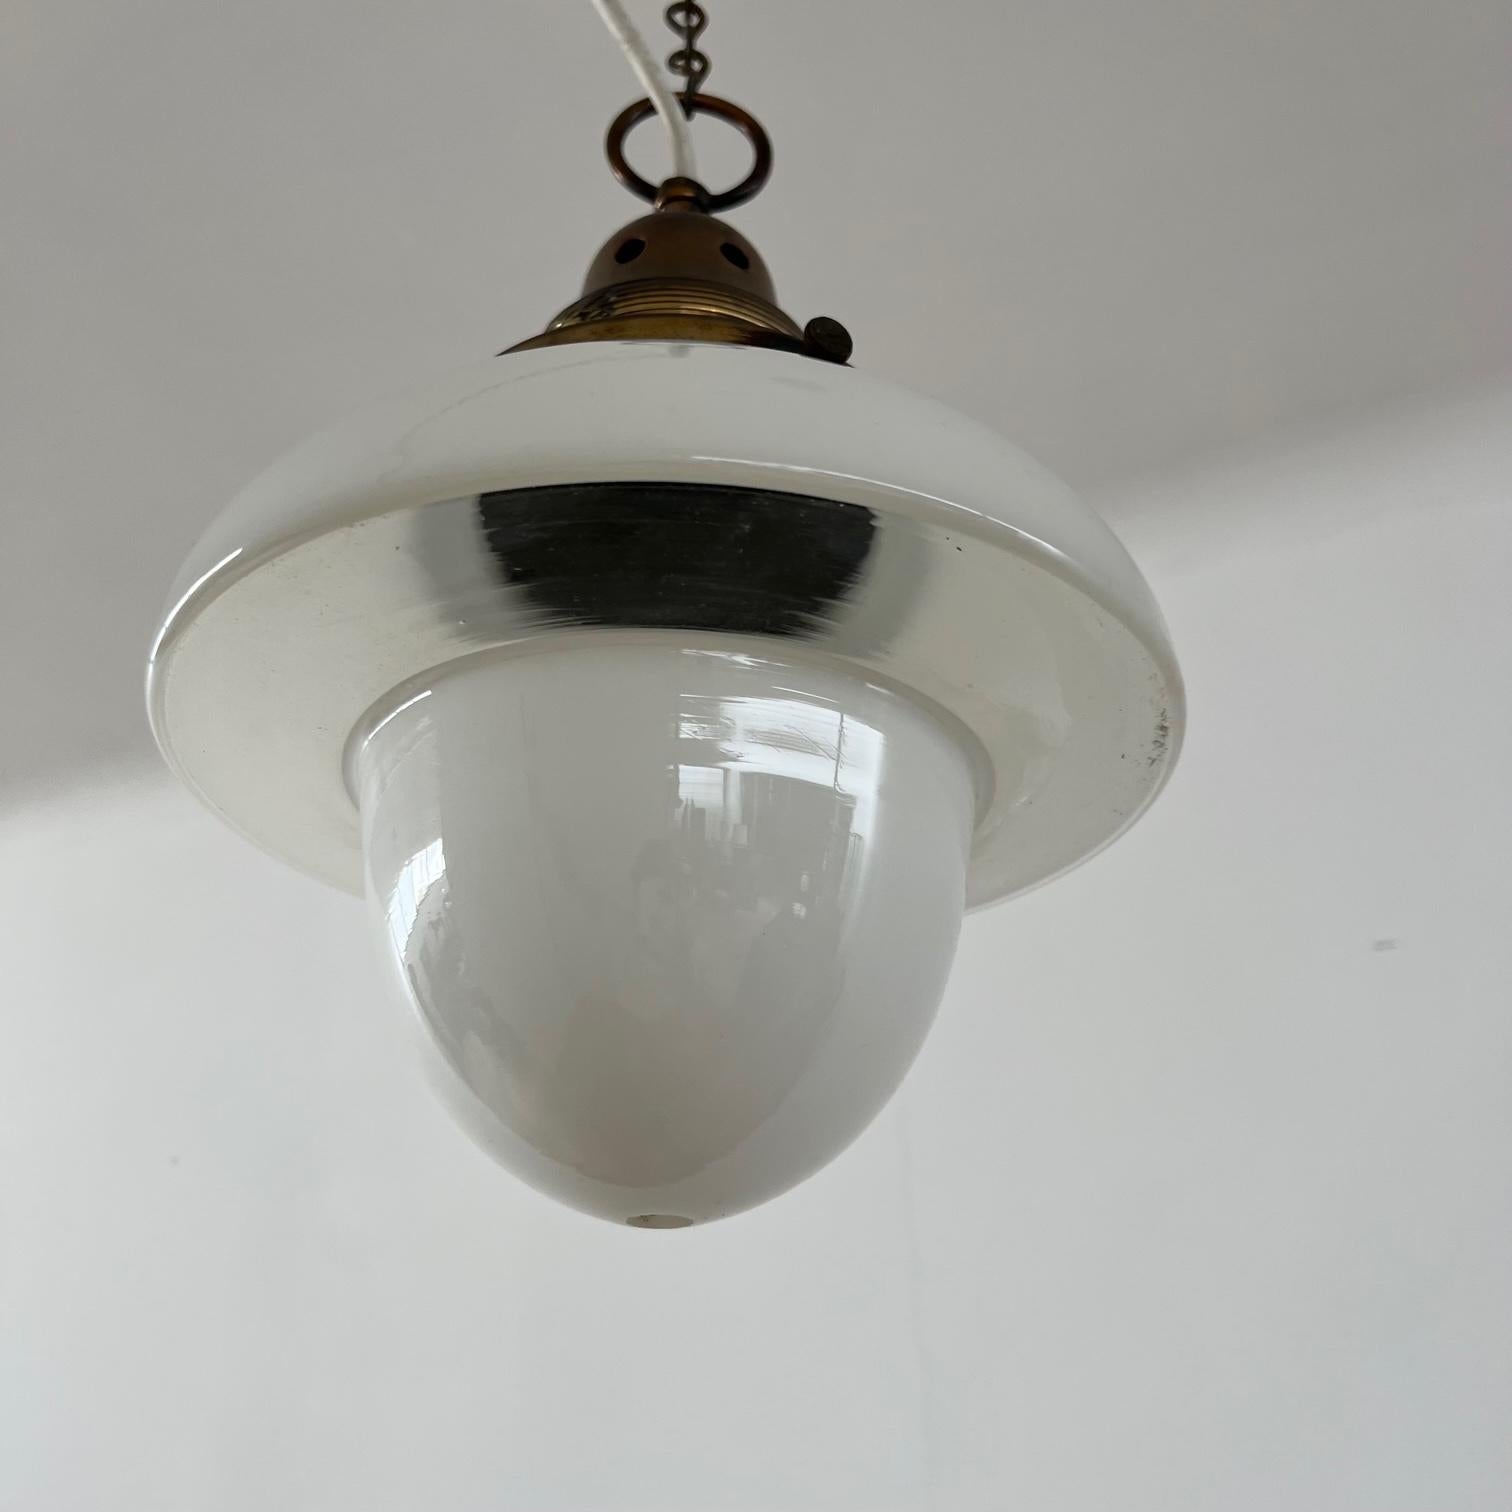 Brass and opaline glass pendant lights. 

England, c1950s. 

Clear underside to the rim, the rest remains opaline white. 

Acorn style shape, good quality brass gallery. 

PRICED AND SOLD INDIVIDUALLY. 

Since re-wired and PAT tested. 

Location: